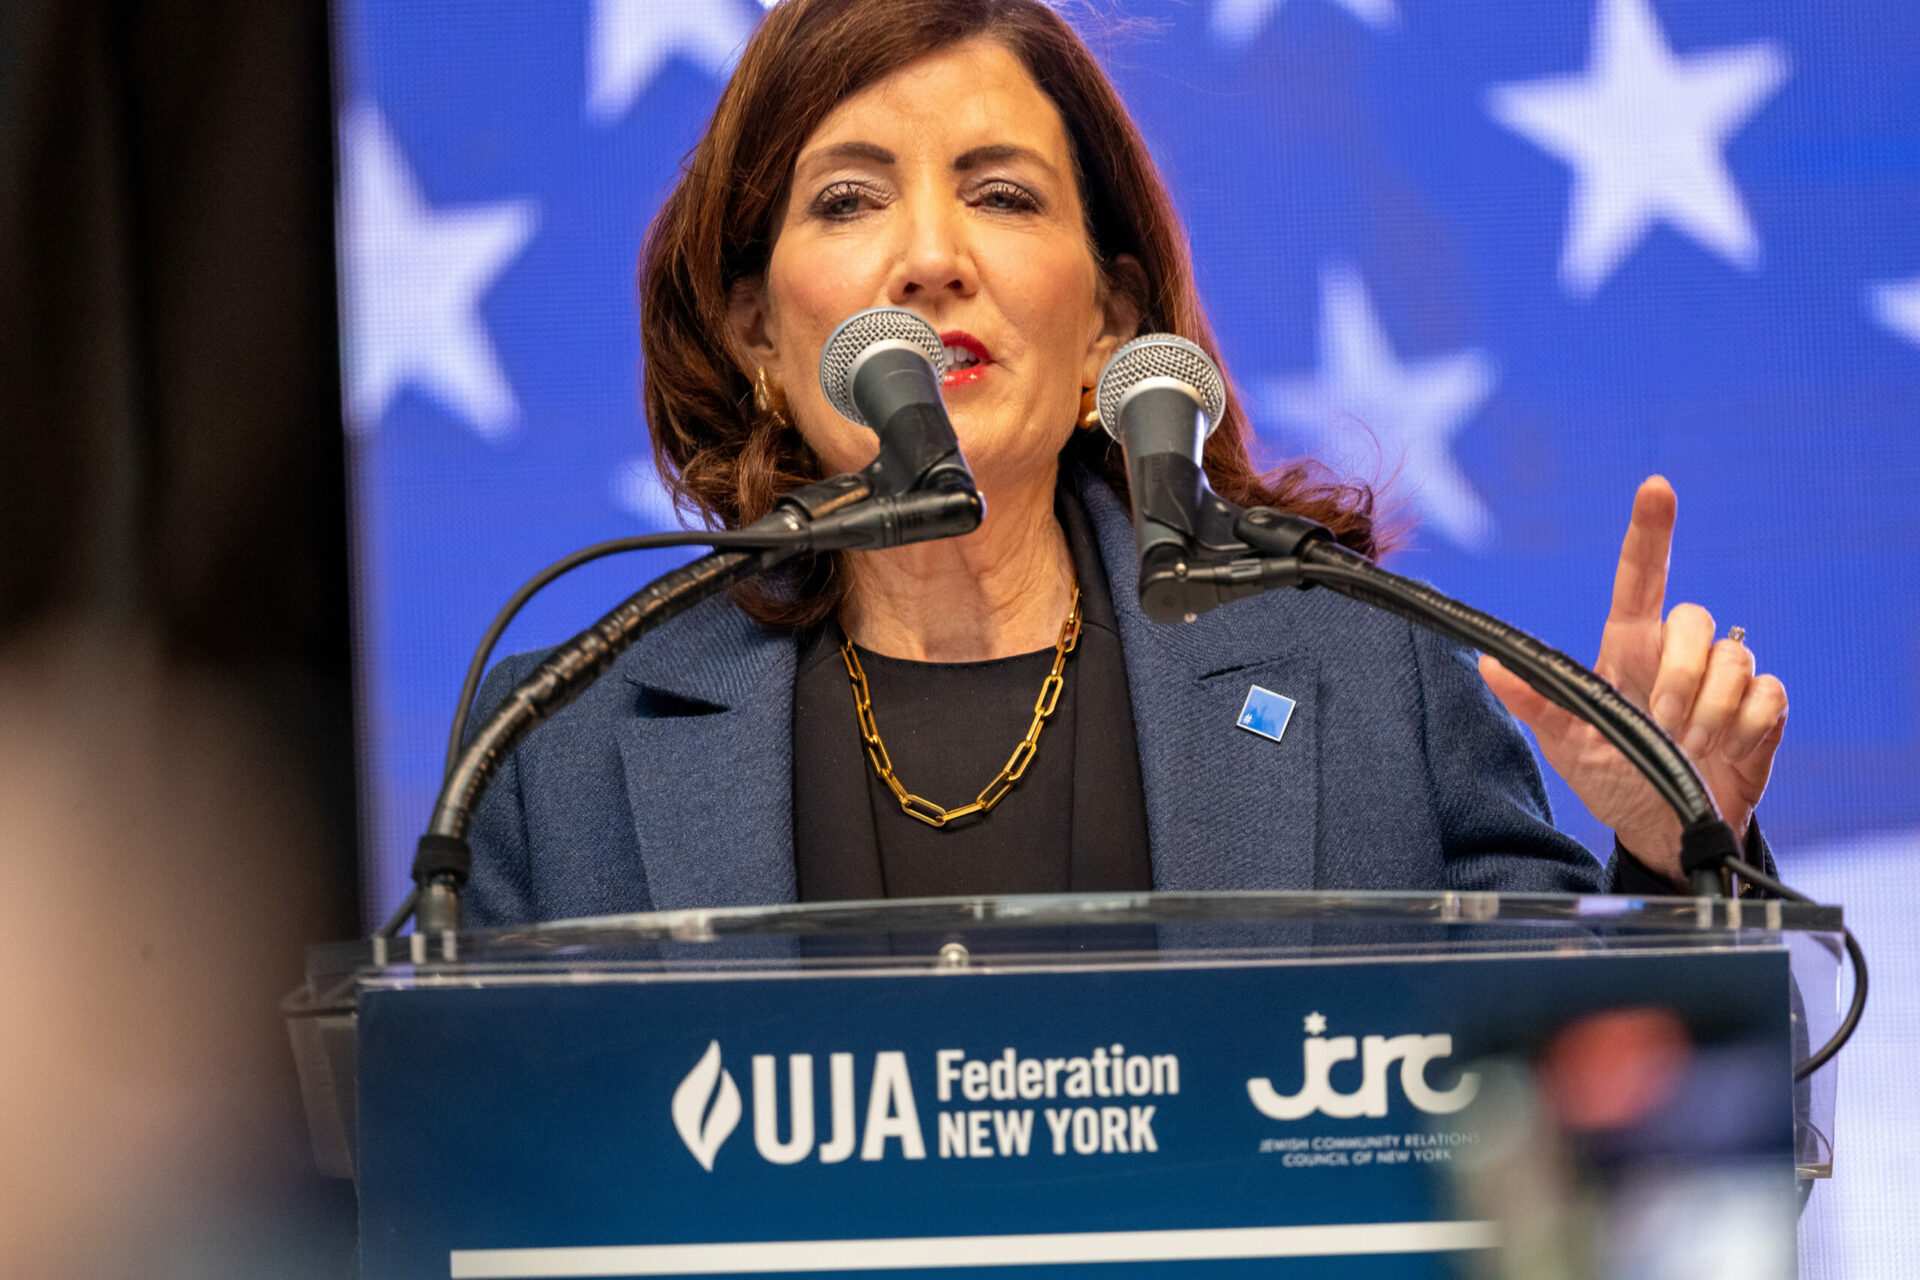 Gov. Hochul says NY has ‘zero tolerance’ for hate, directs $75 million toward anti-hate policing